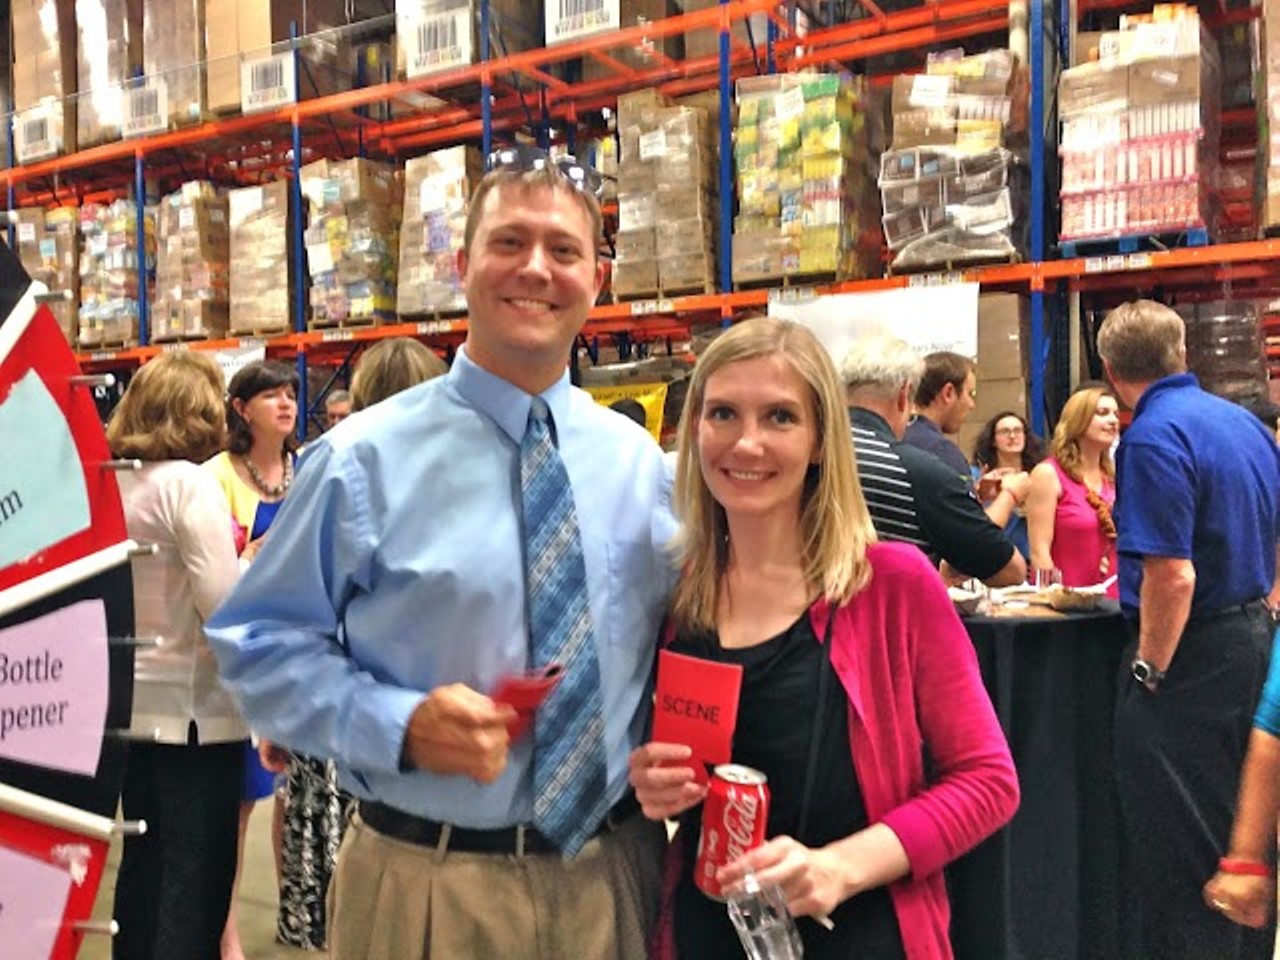 Photos of the Scene Events Team Driven by Fiat of Strongsville at BrewHaHa